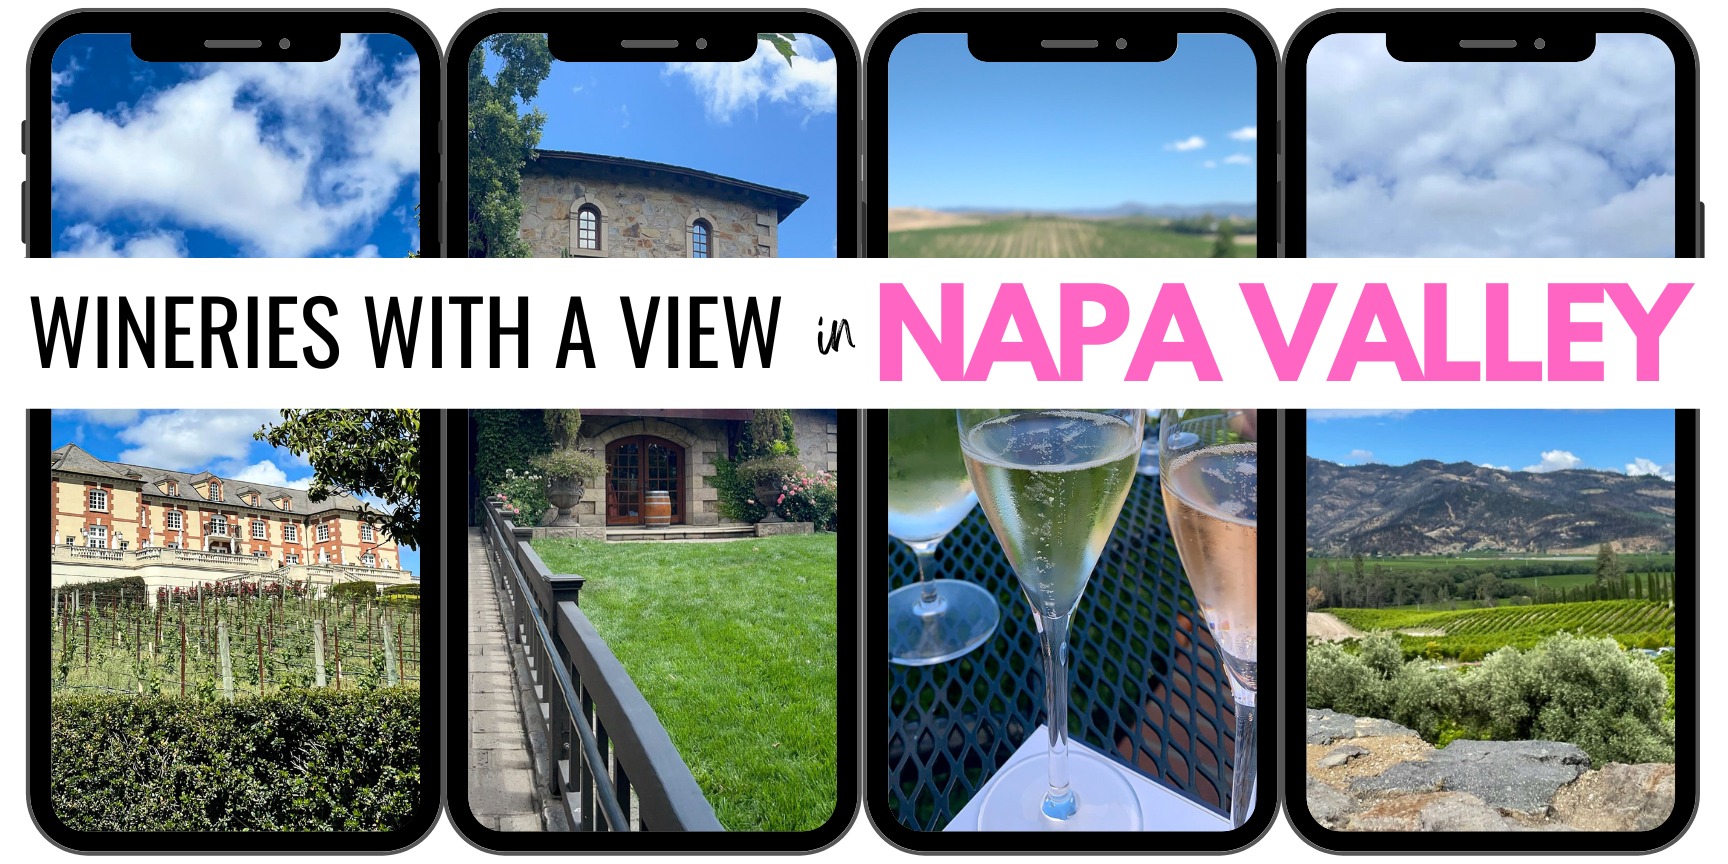 Wineries with a view in Napa Valley